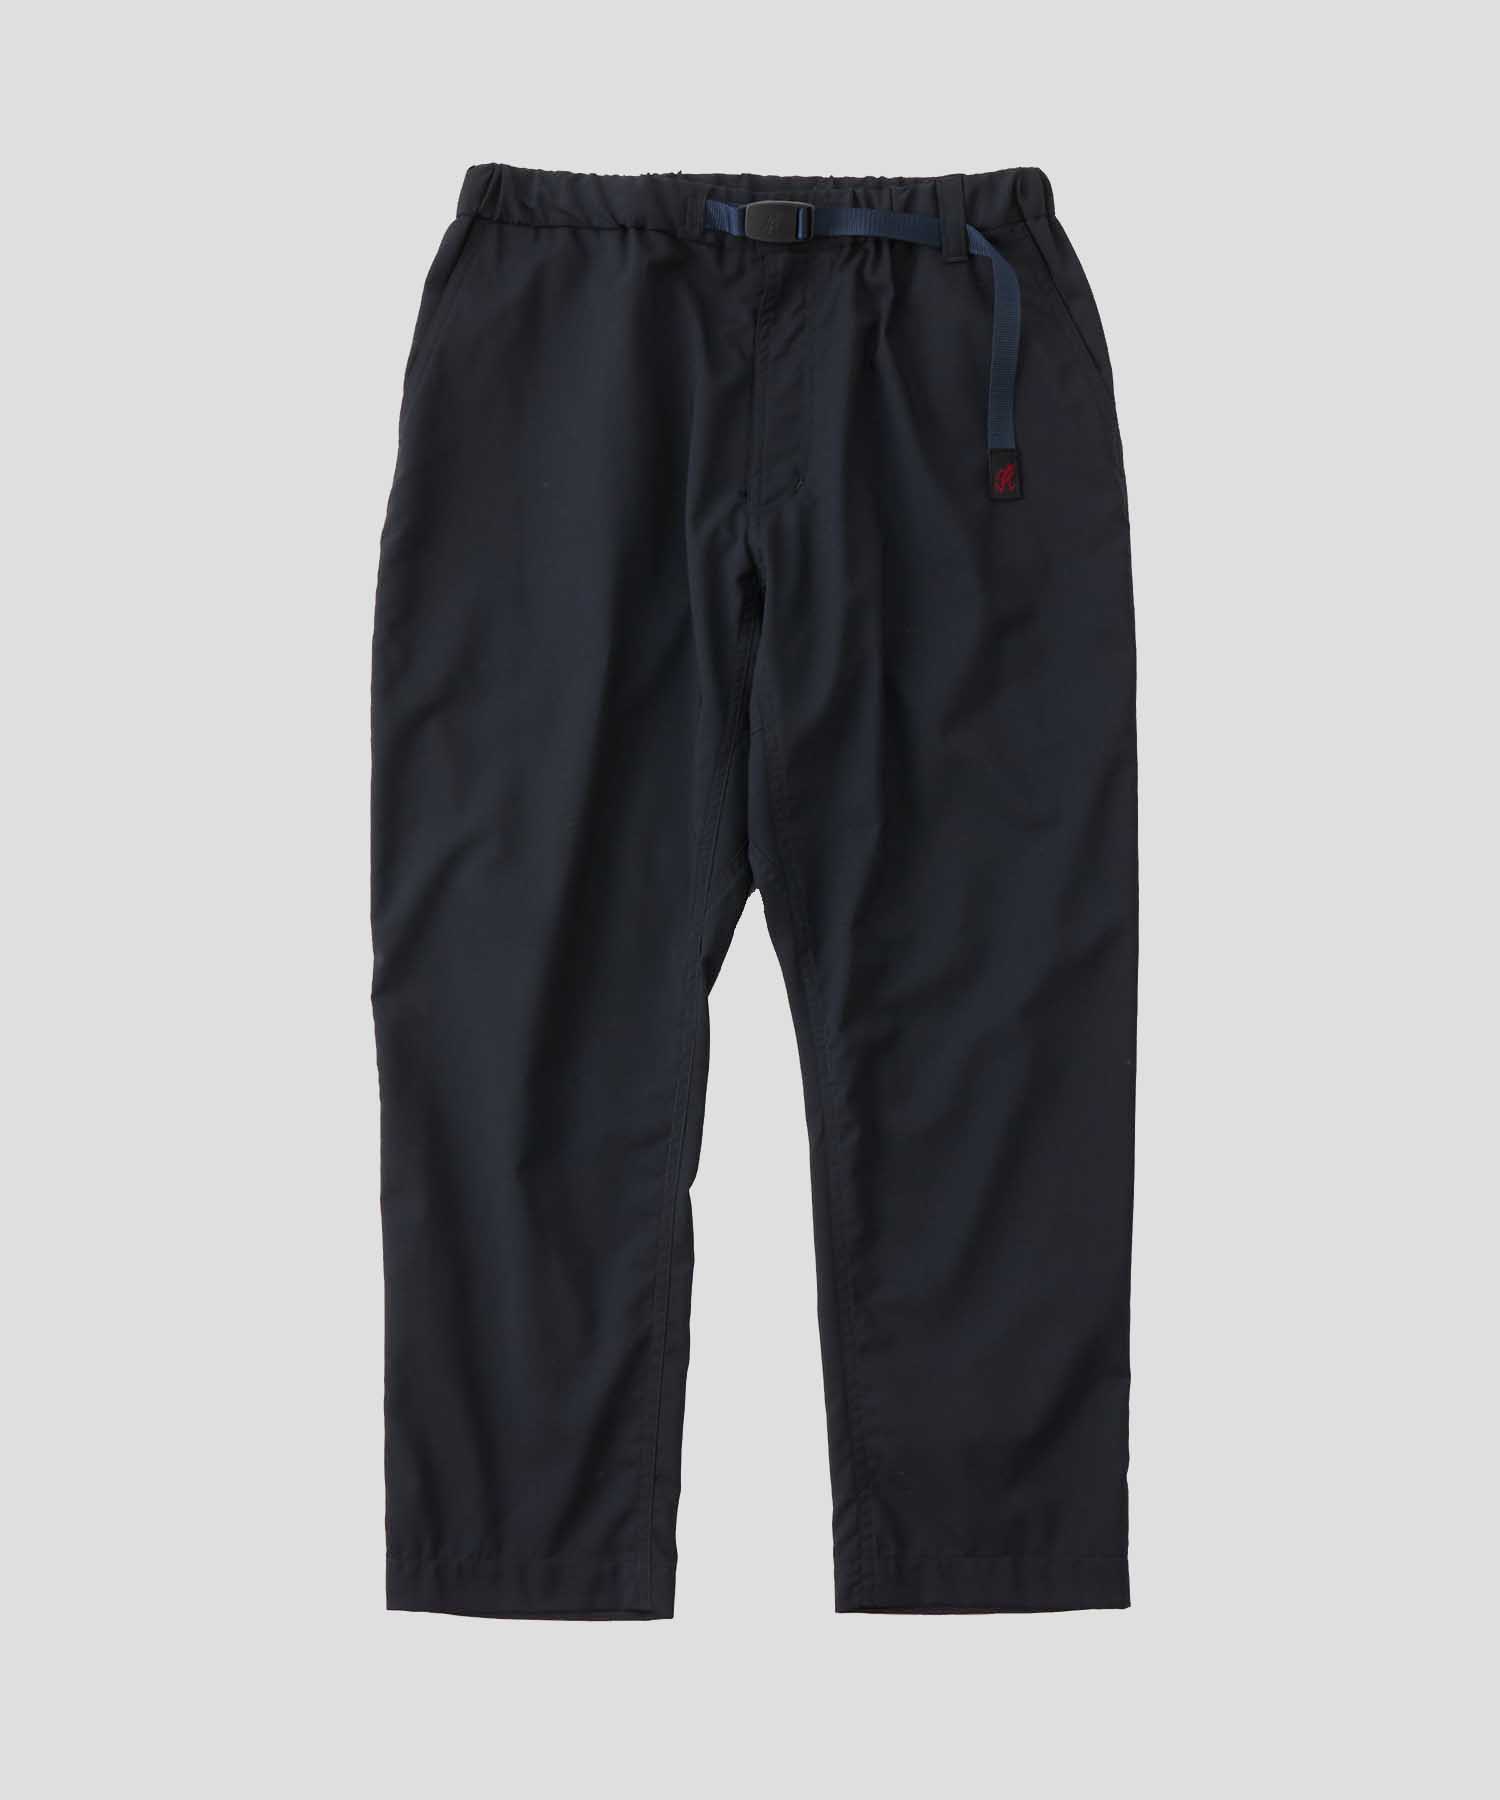 ×GRAMICCI TECH WOOLY TAPERED PANTS